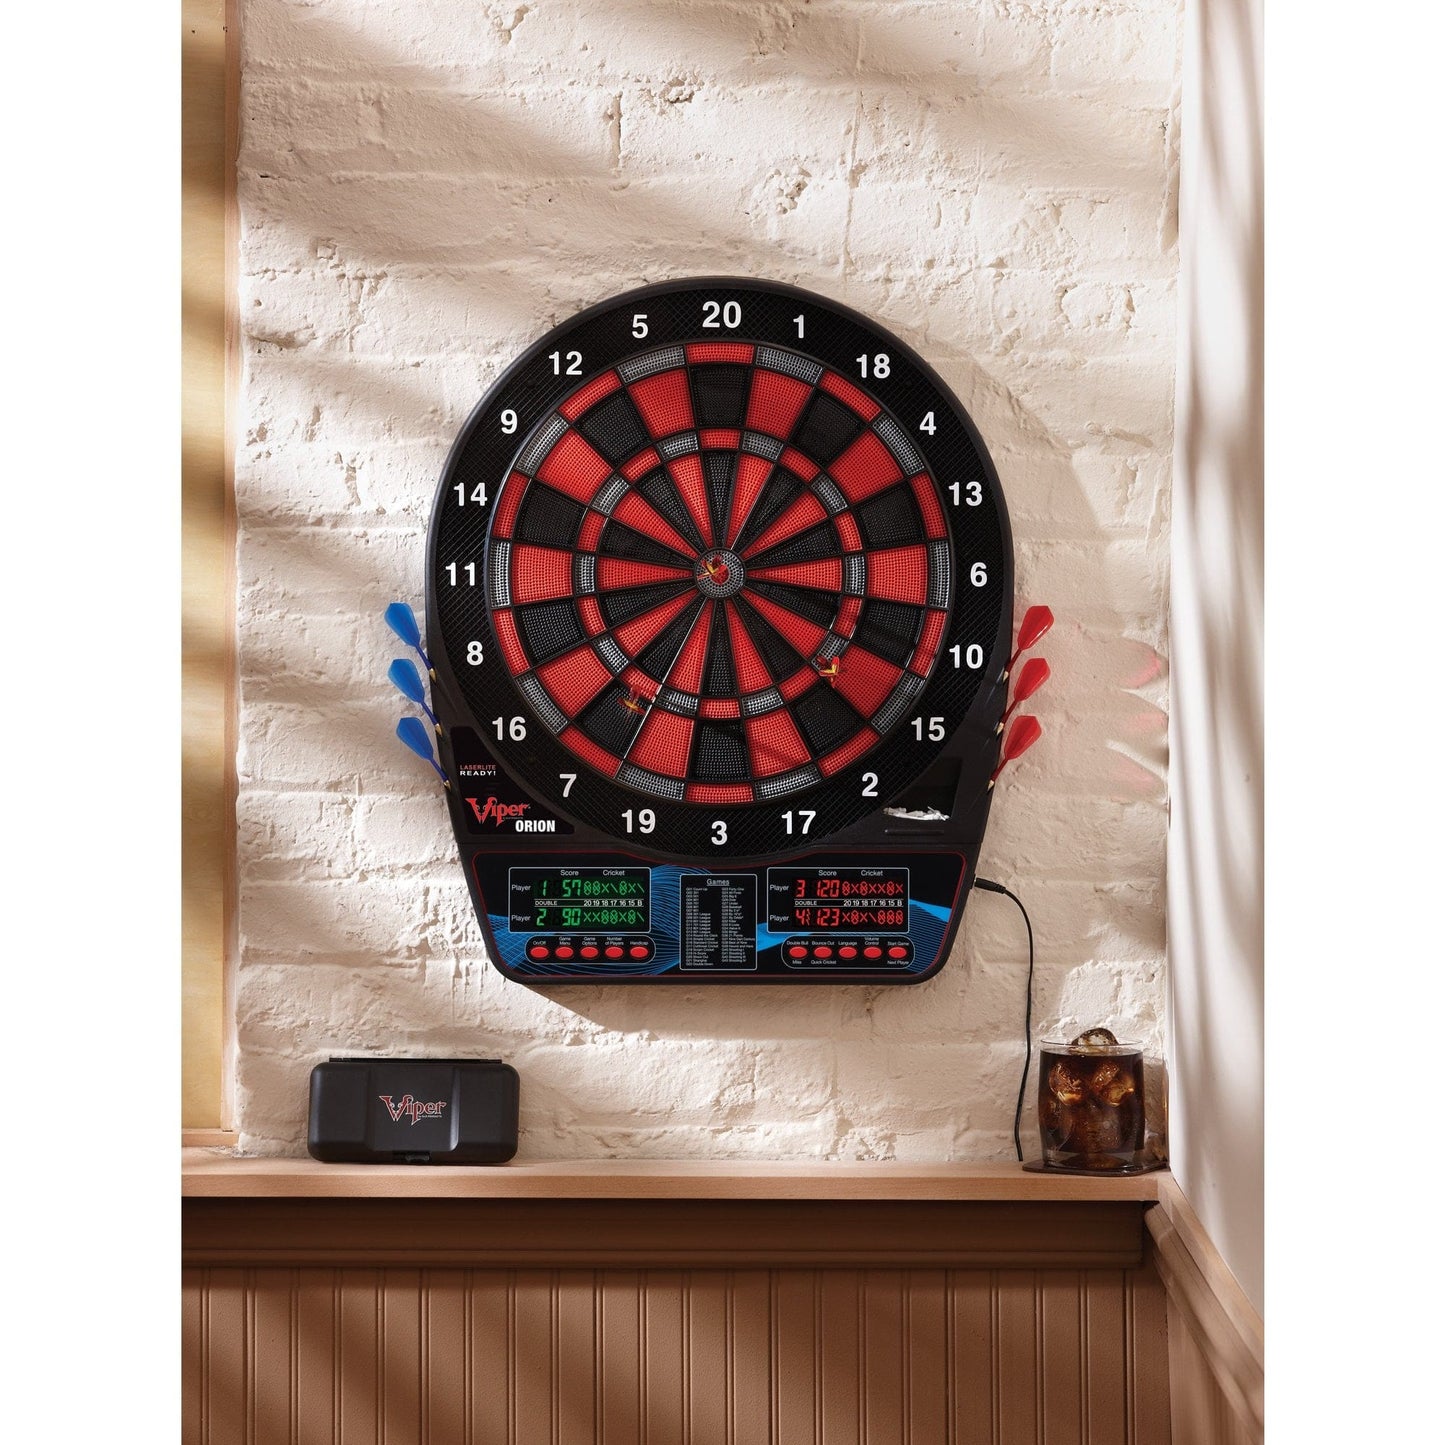 Viper Orion Electronic Dartboard - Ultra Thin Spider - Professional